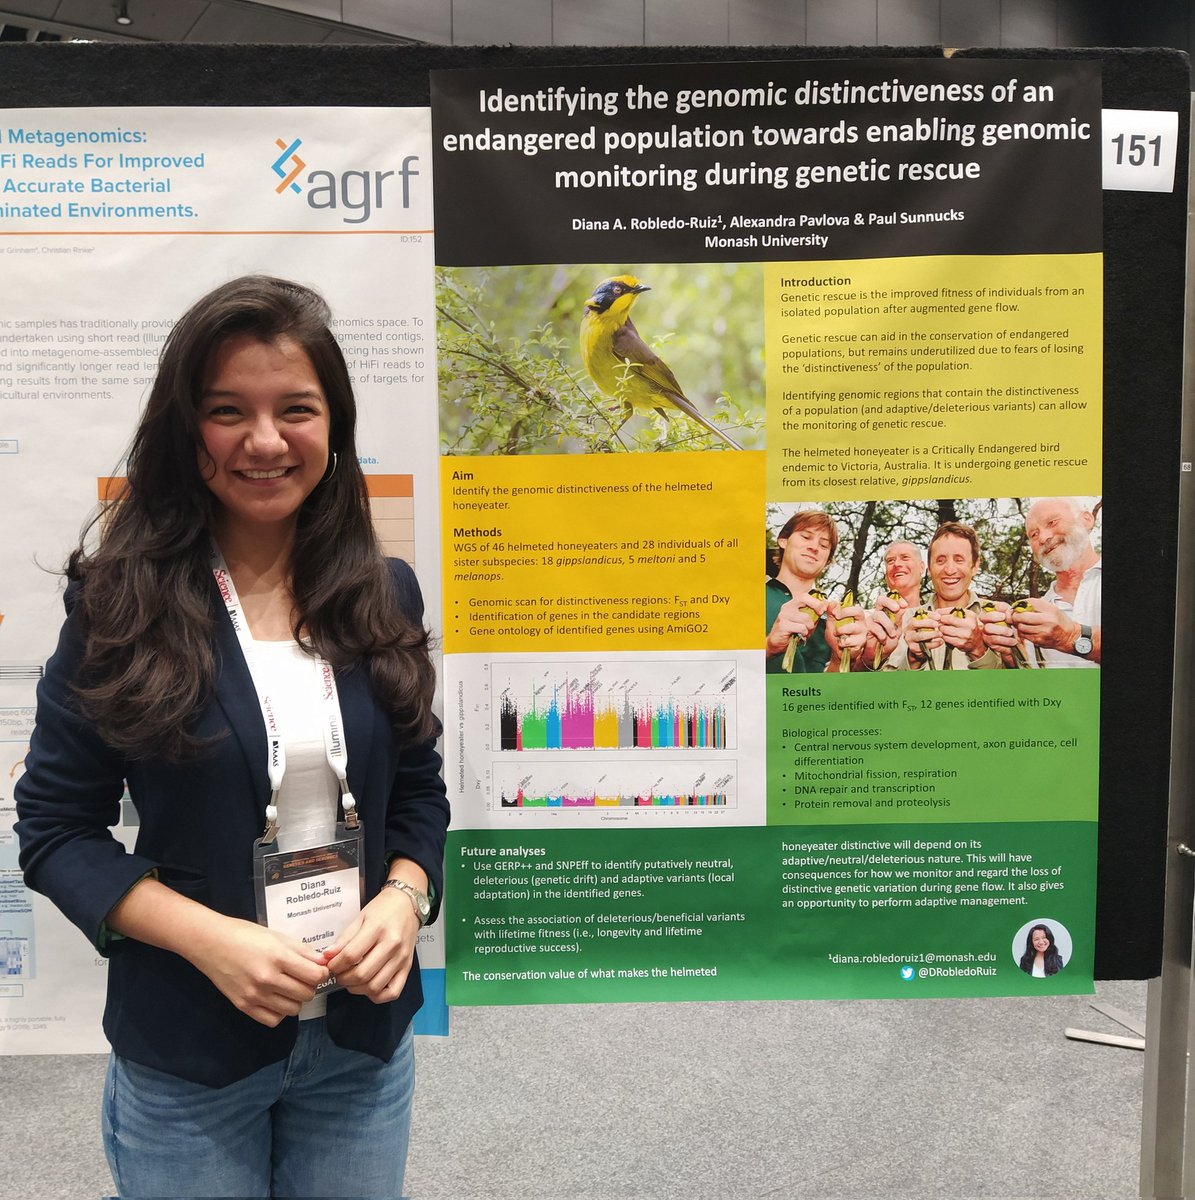 Looking forward to seeing you tomorrow at poster 151 at #ICG2023! Come talk about the #GeneticRescue of the gorgeous Helmeted Honeyeater 🌏 @SashaPavlova123 #ConservationGenomics